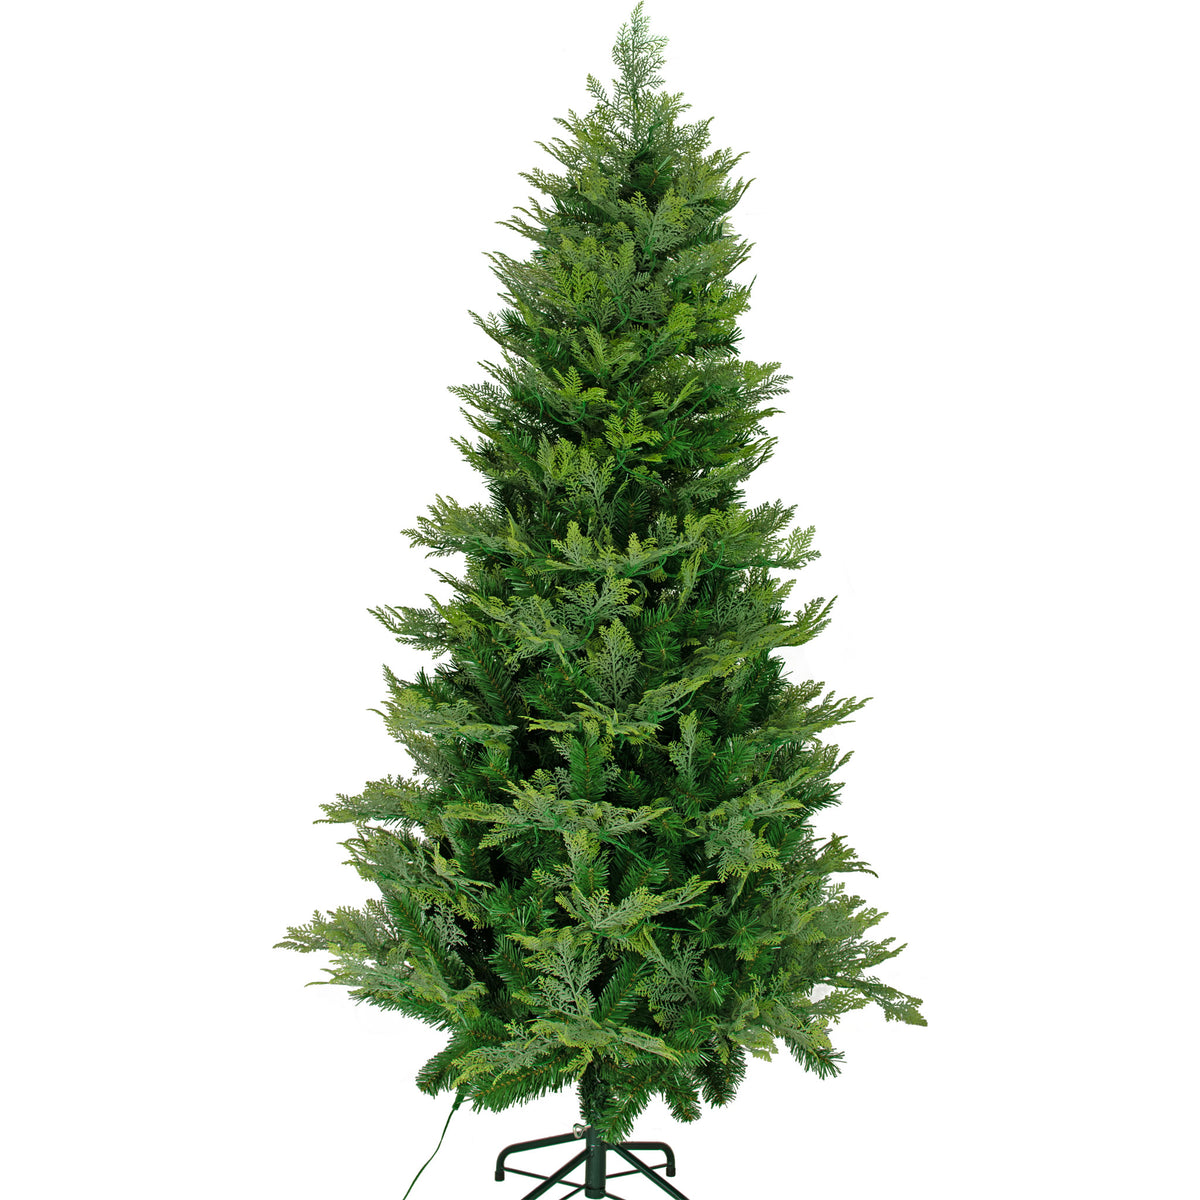 Introducing the 6FT Pre-Lit Leyland Cypress Tree with LED Lights from our Luxe Christmas Collection!